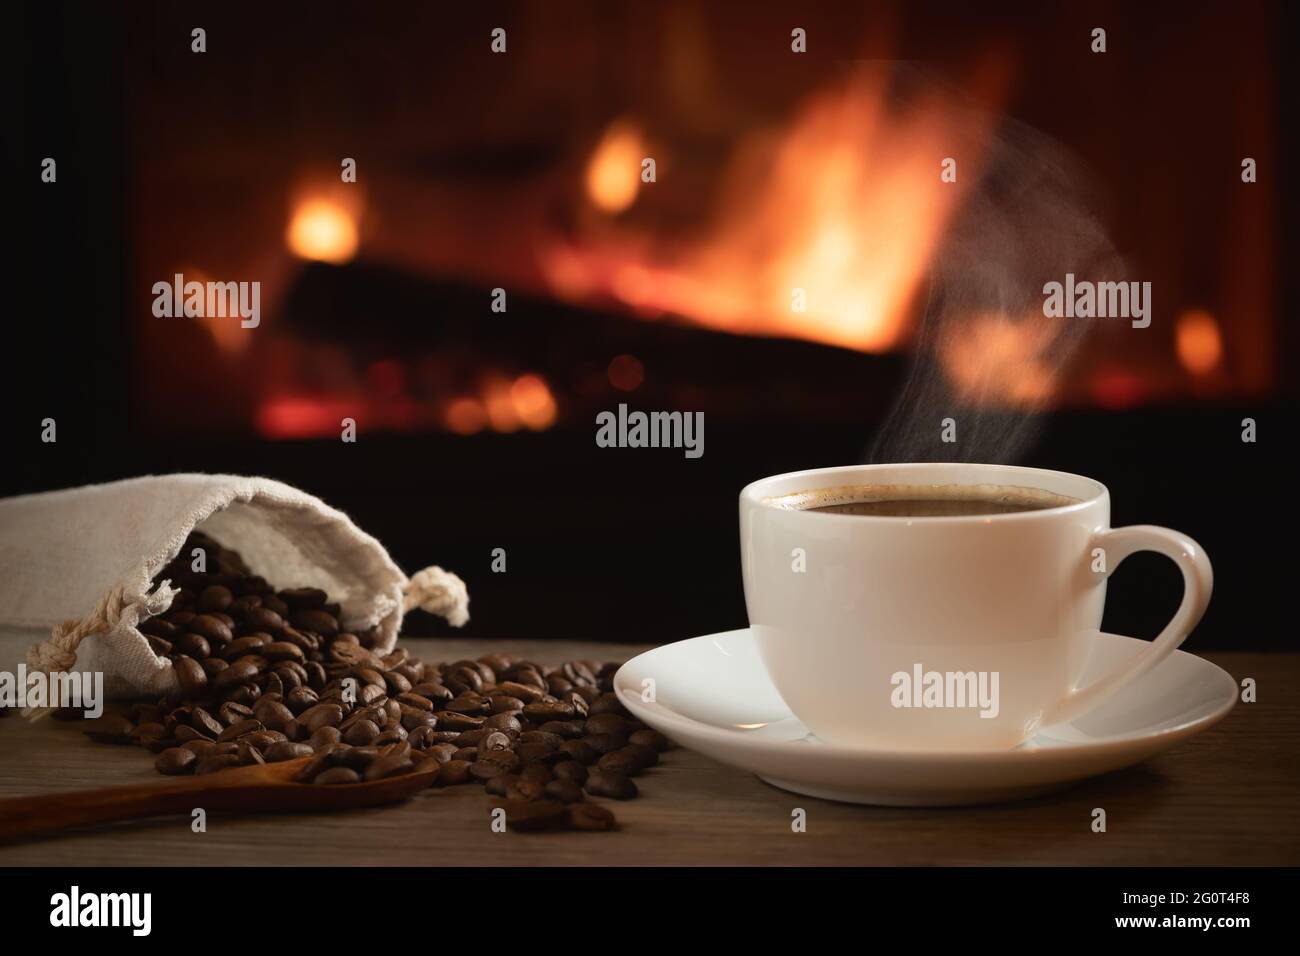 Cup of hot coffee and coffee beans in a bag on a wooden table in front of a burning fireplace. Selective focus. Stock Photo